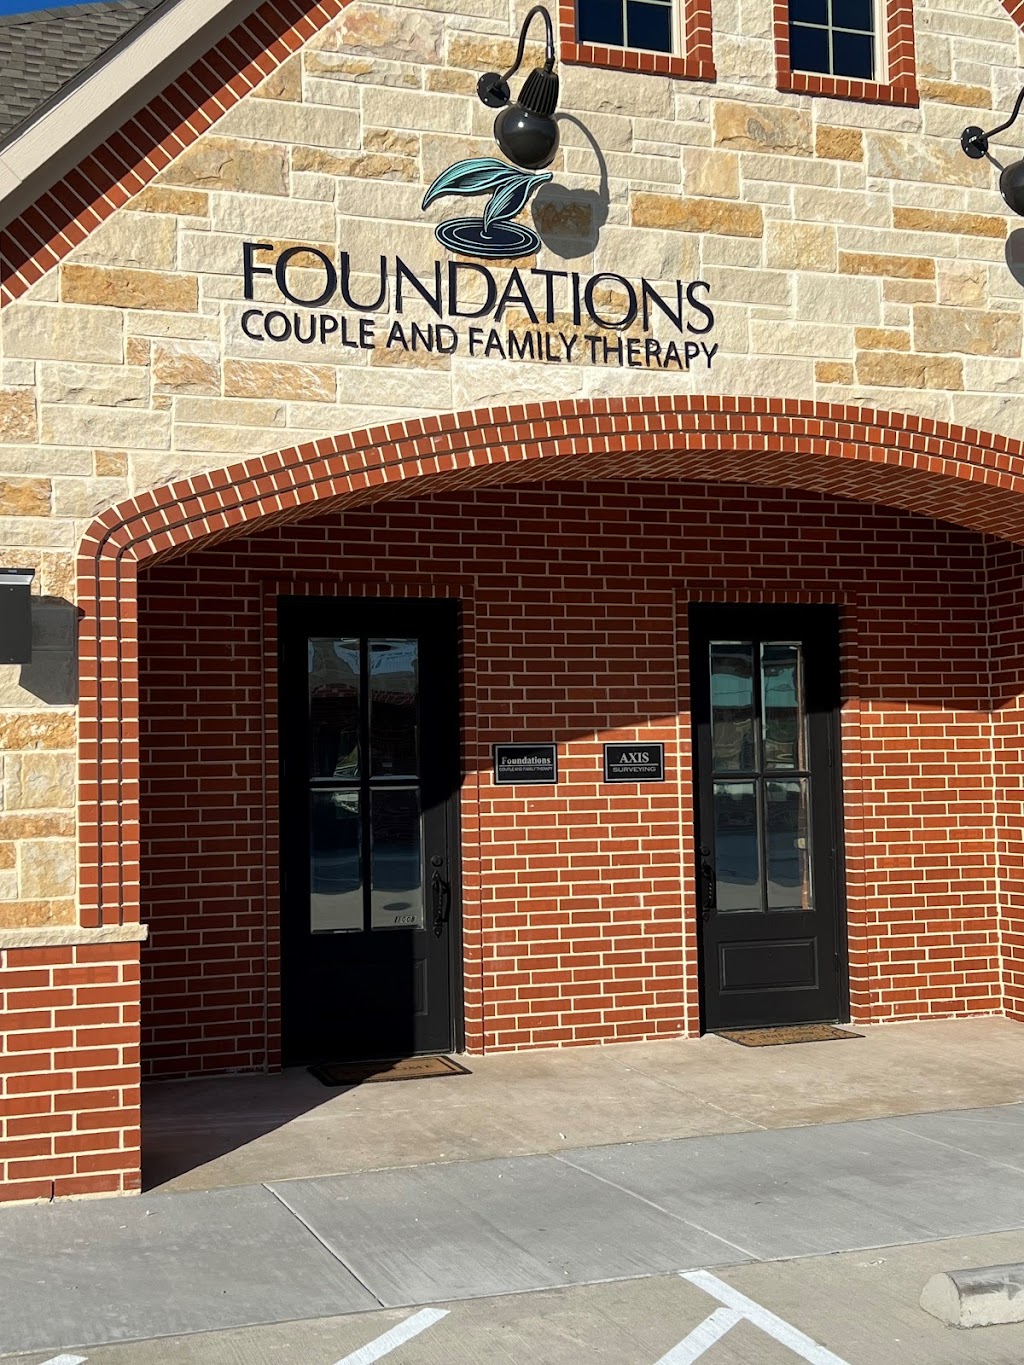 Foundations Couple and Family Therapy | 1002 Legacy Ranch Rd Suite 100B, Waxahachie, TX 75165, USA | Phone: (972) 441-5811